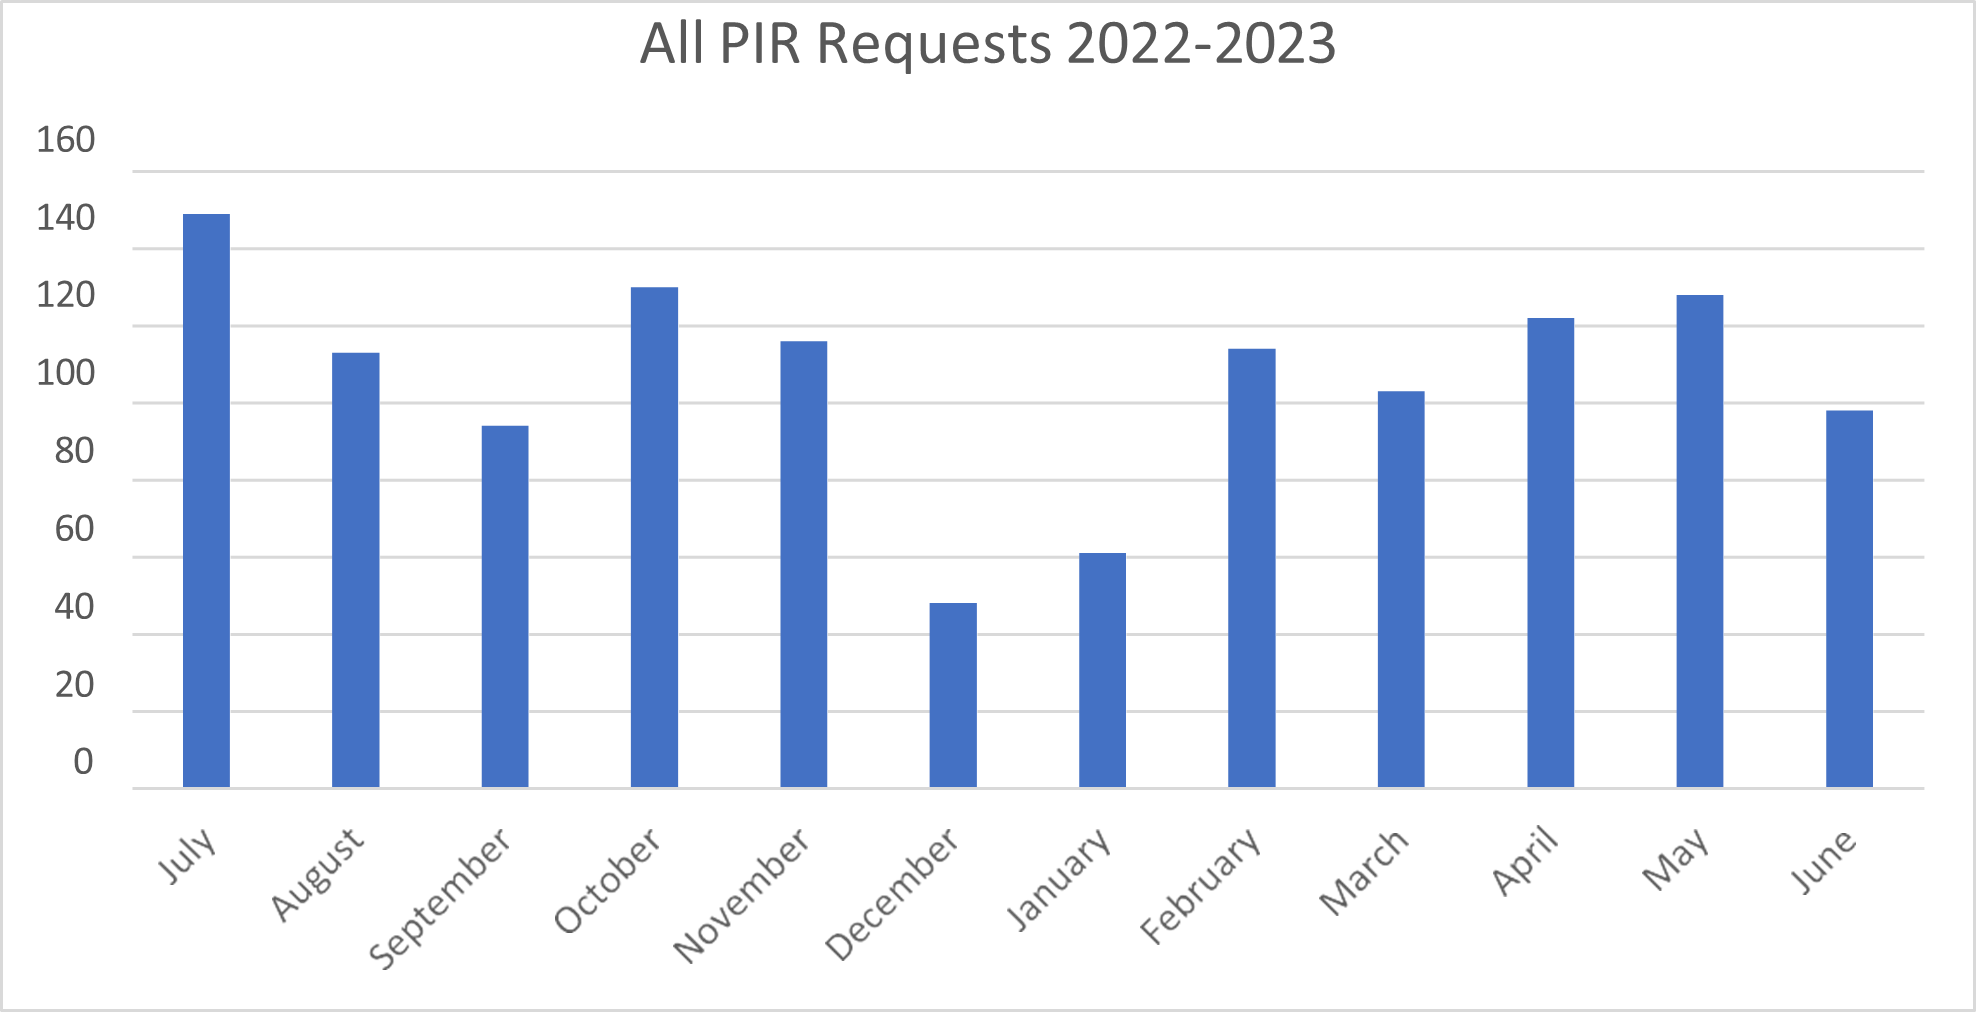 Bar chart showing a monthly breakdown of all Property Interest Reporting (PIR) requests for 2022-2023. July 2022 has the most requests, with almost 150. December 2022 has the fewest, with almost 50.